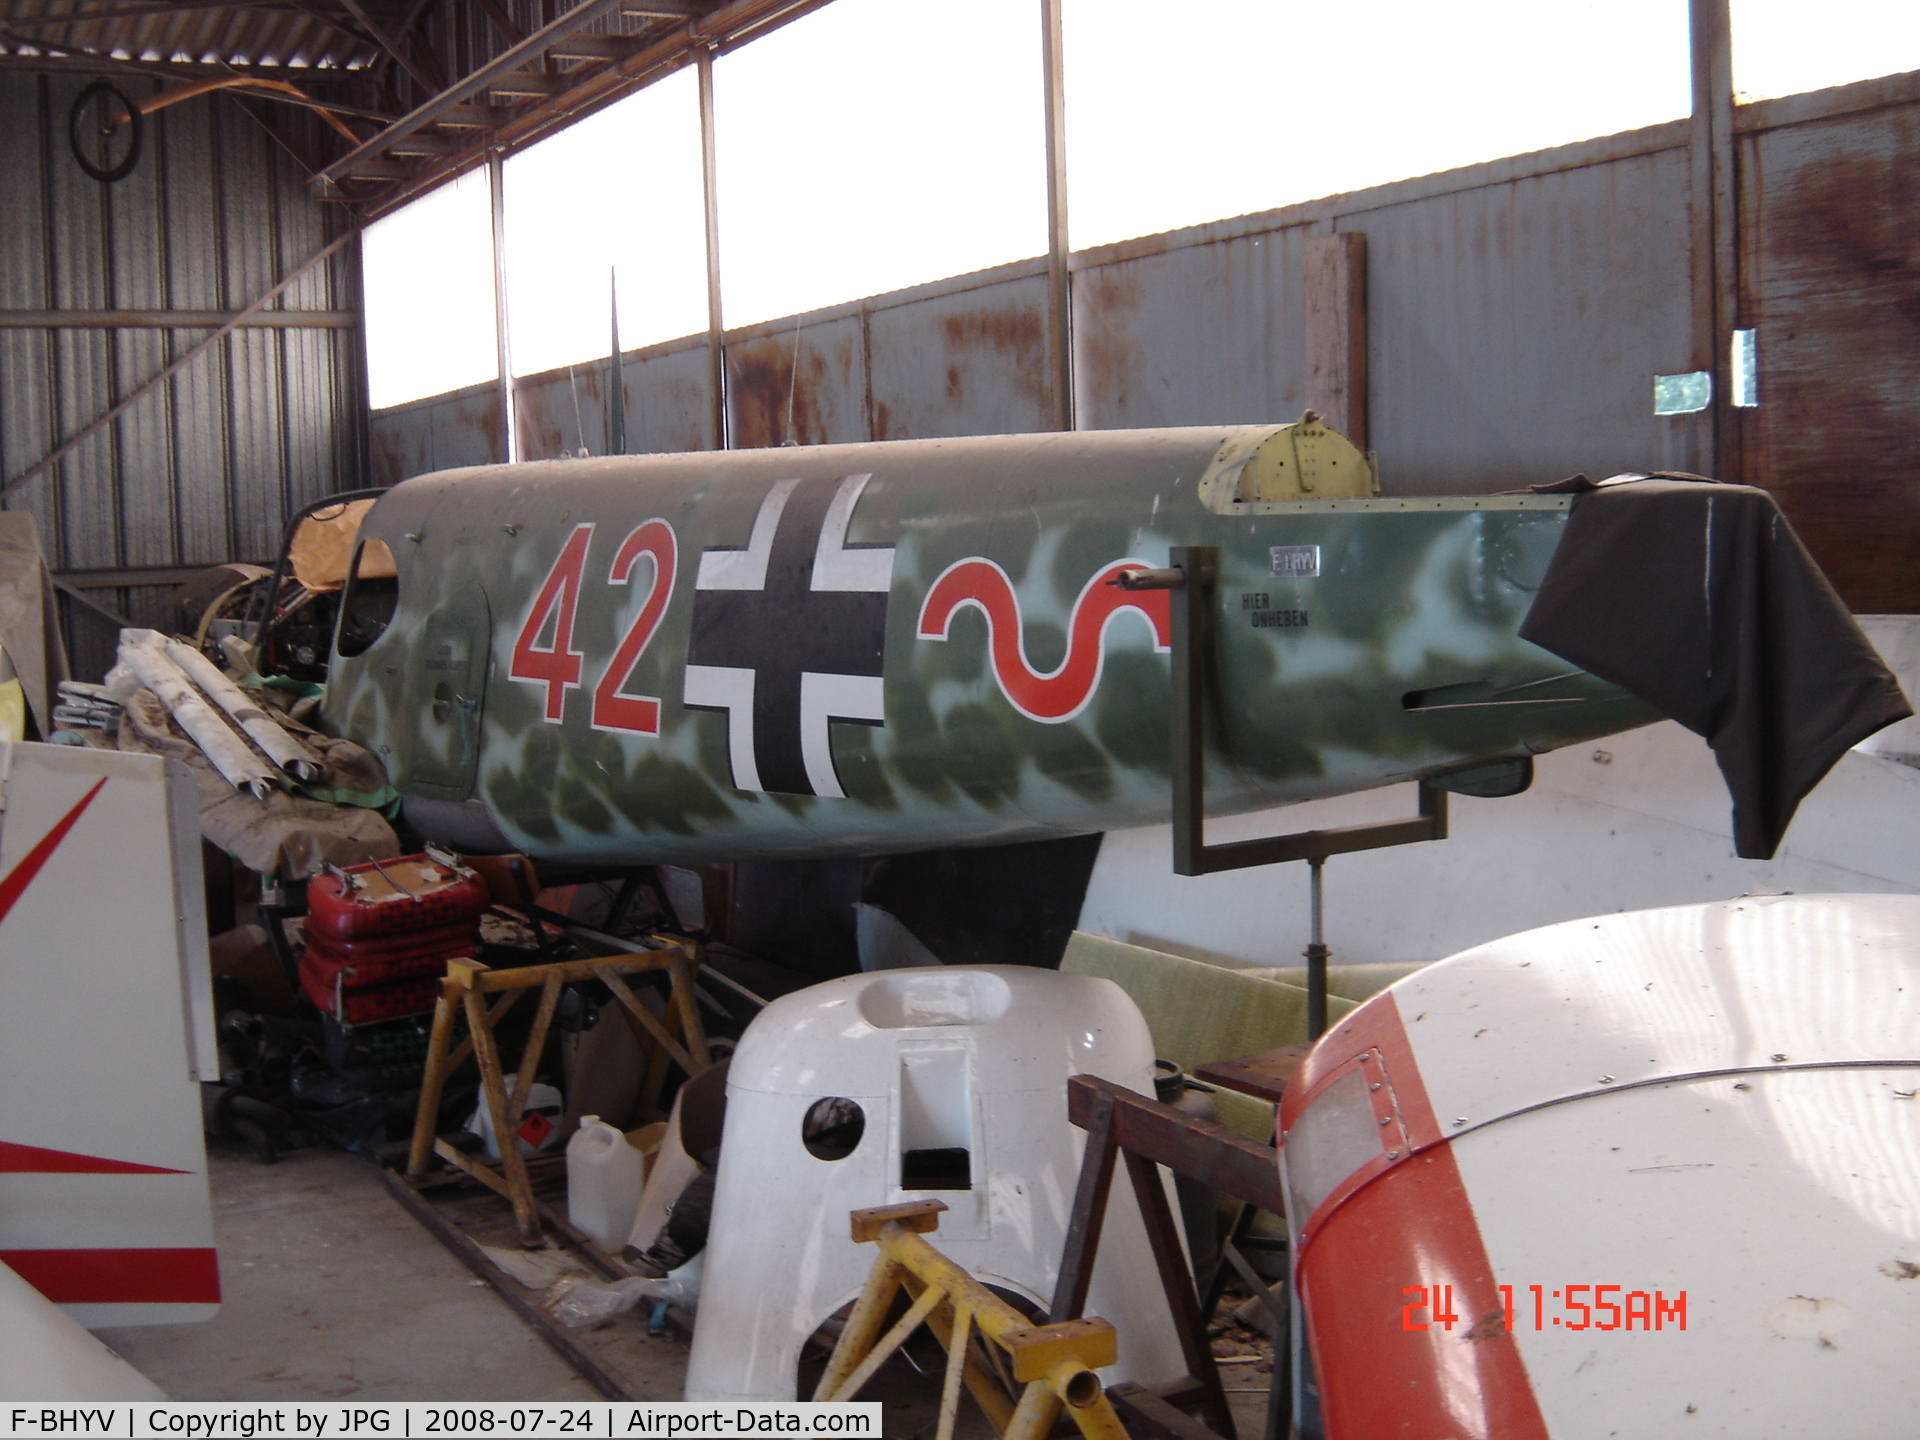 F-BHYV, Nord 1101 Noralpha C/N 42, It is a restoration project.